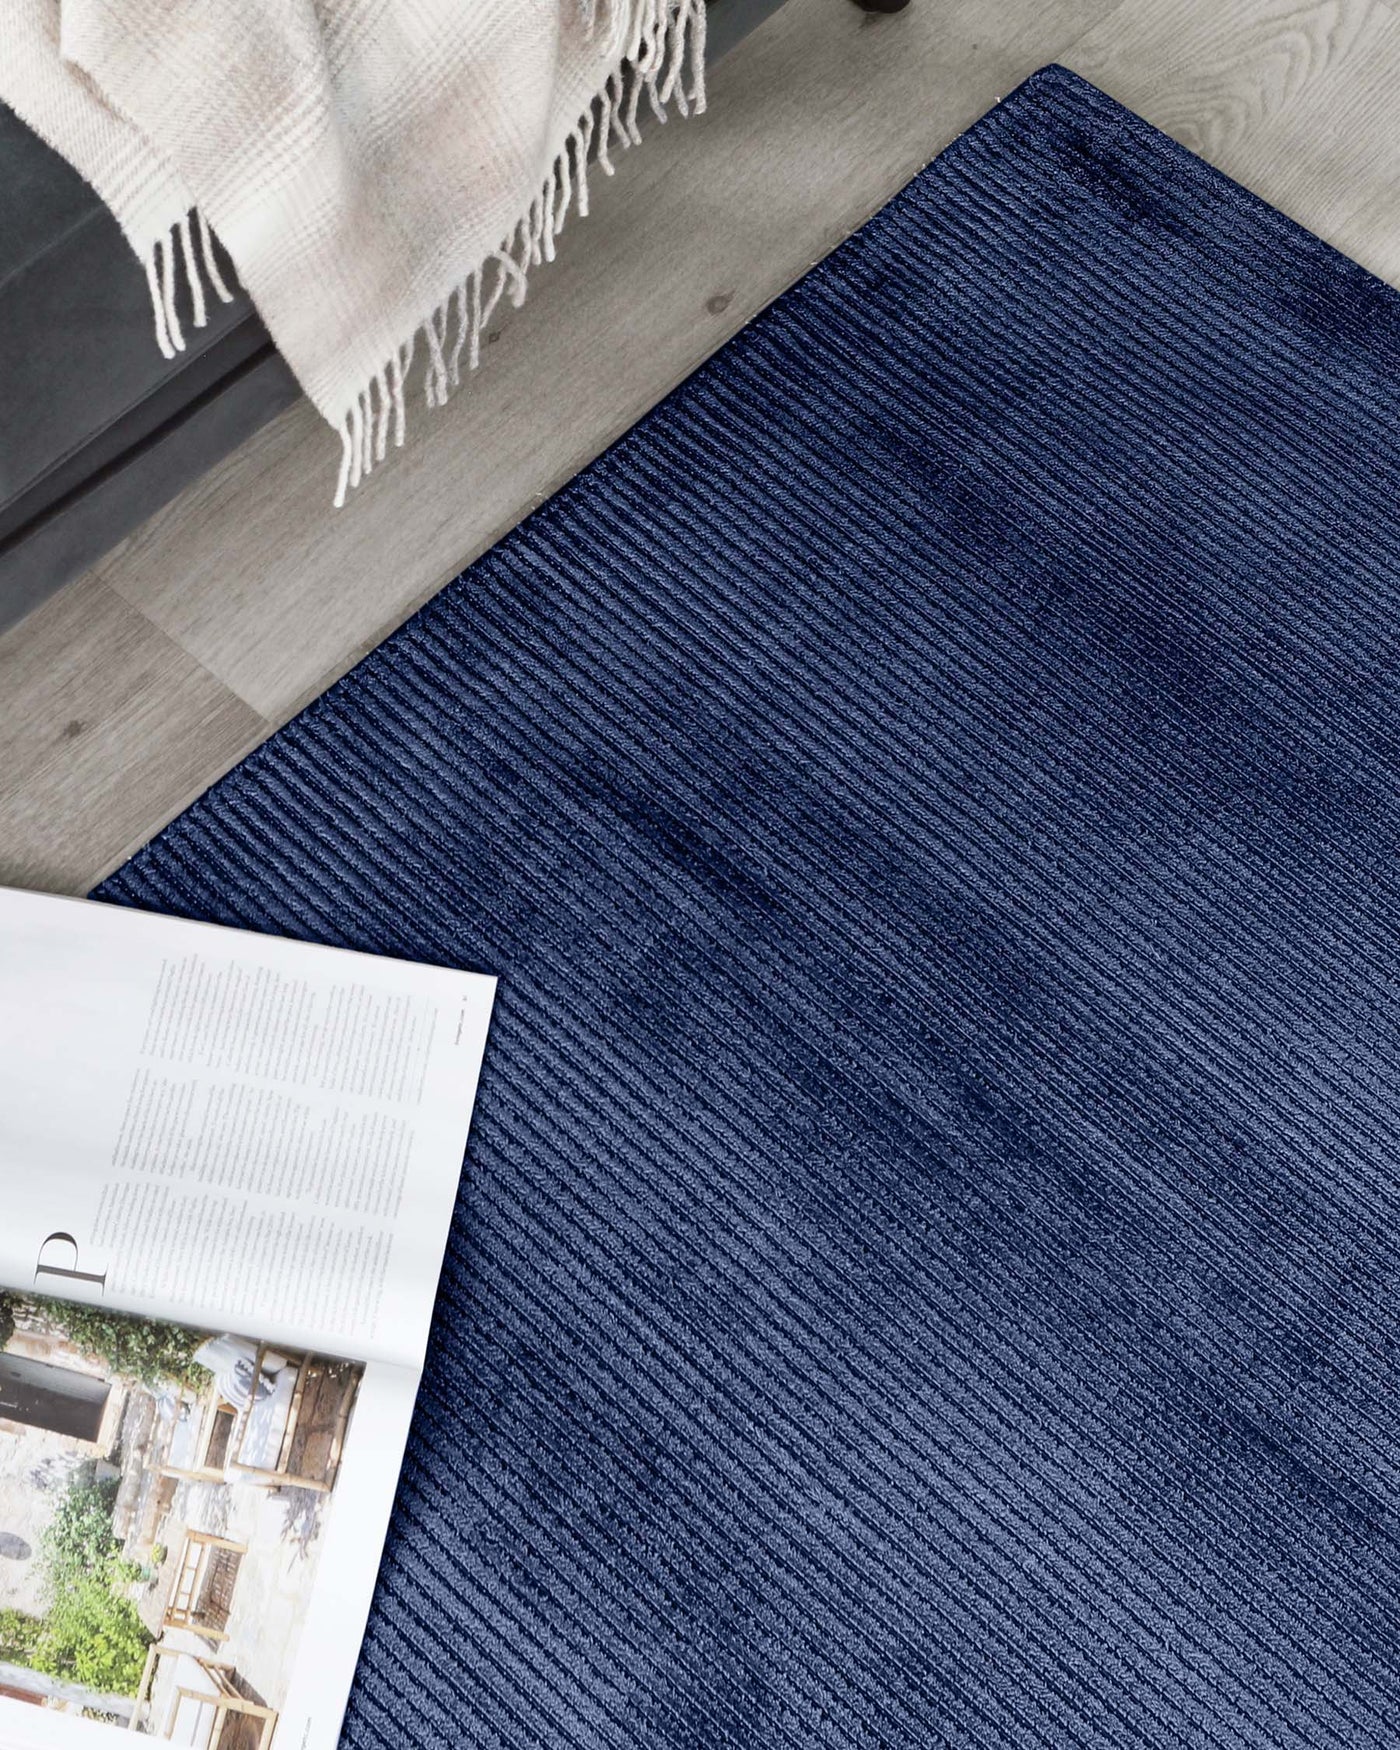 Contemporary deep blue textured area rug with a subtle linear pattern, placed on a hardwood floor partially under a light grey upholstered bench with a beige fringed throw blanket casually draped over the corner, next to an open magazine.